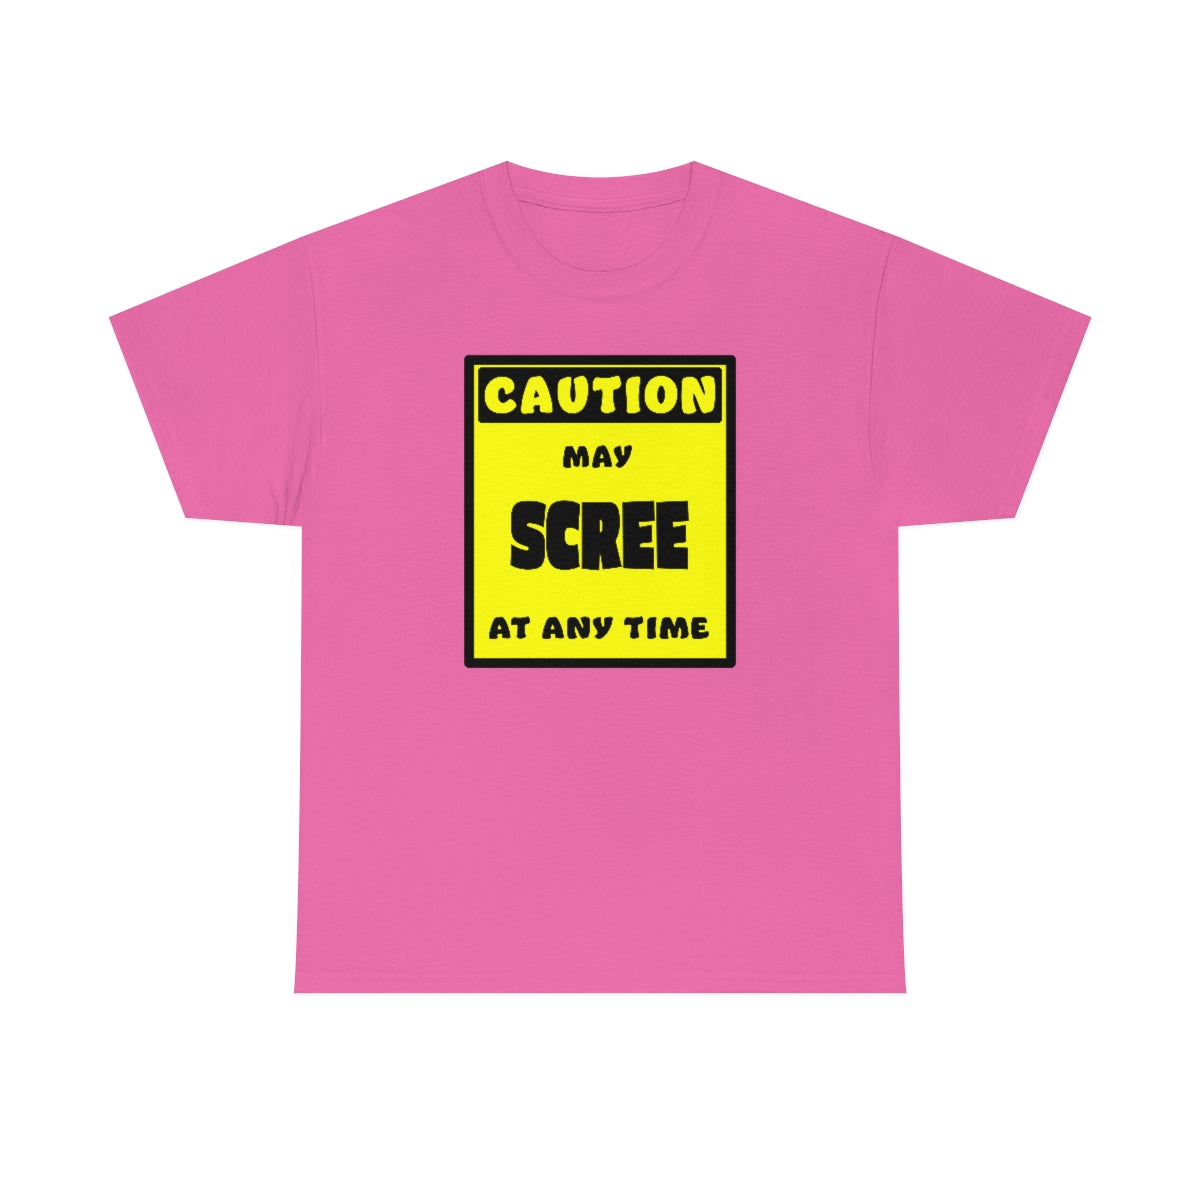 CAUTION! May SCREE at any time! - T-Shirt T-Shirt AFLT-Whootorca Pink S 